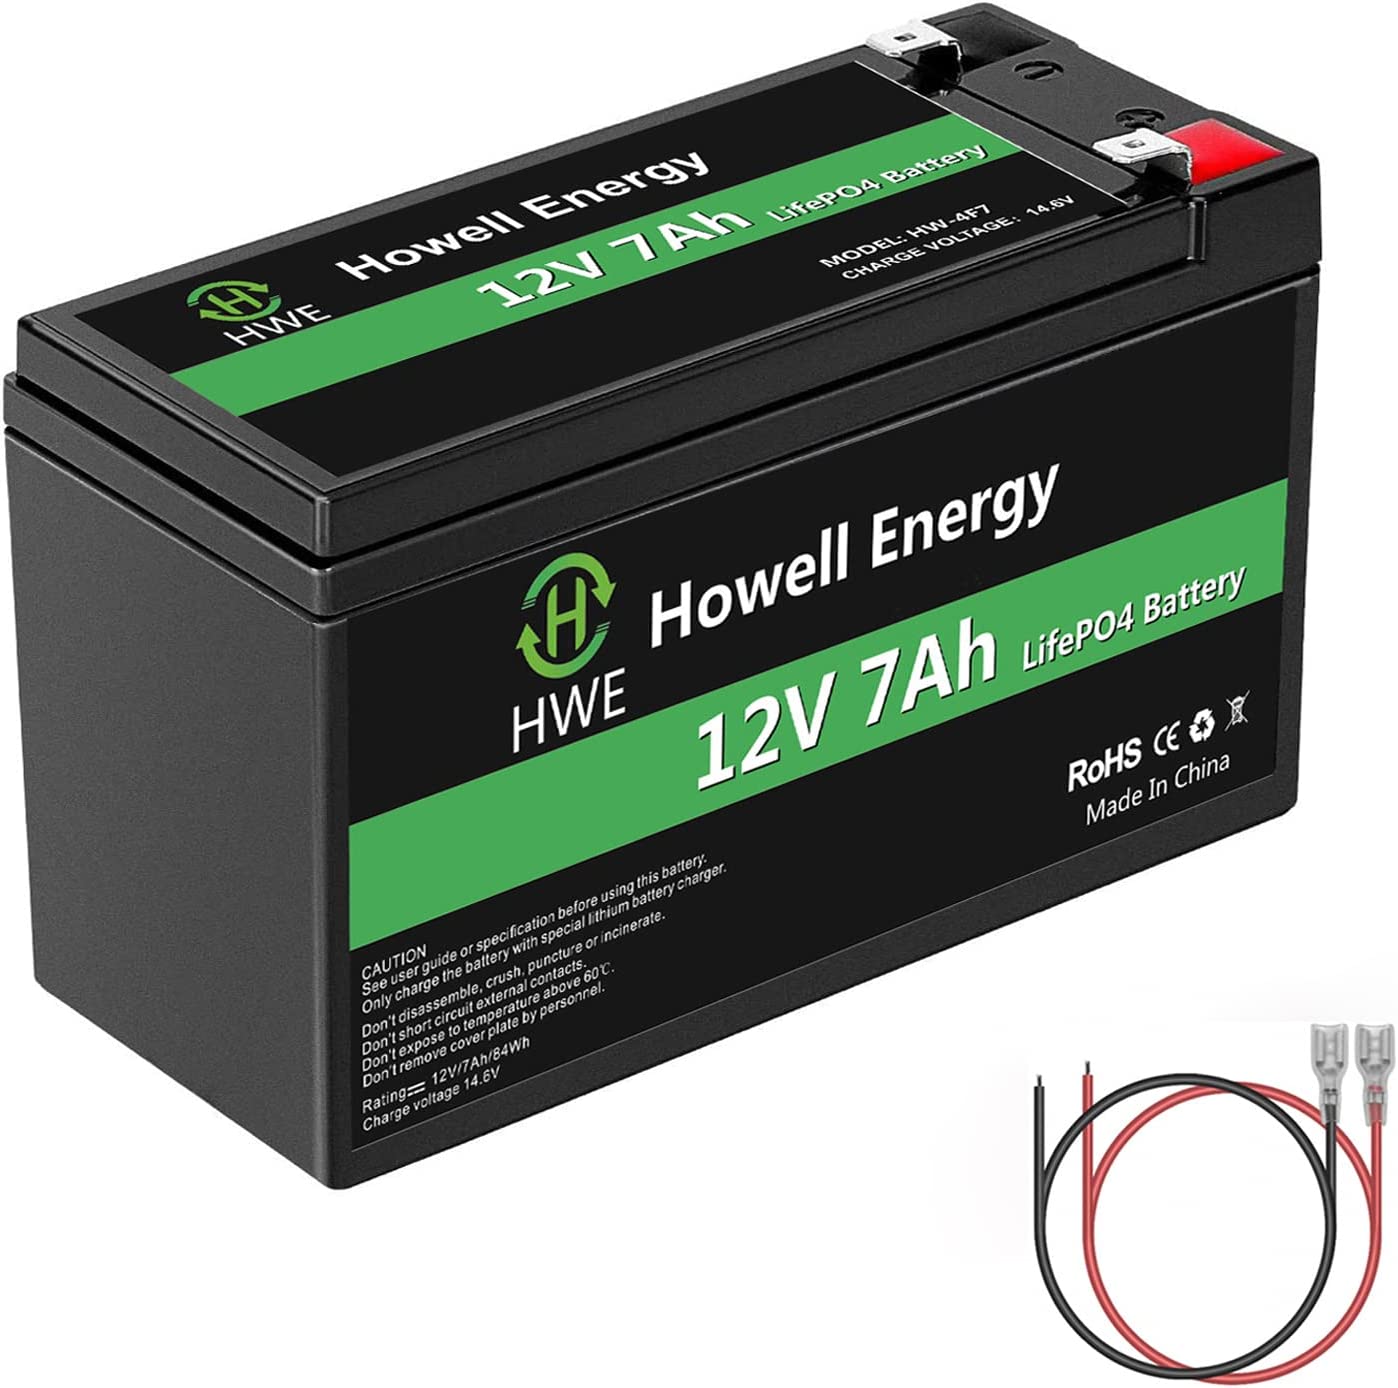 12V 7Ah Battery, HWE Energy Rechargeable LiFePO4 Battery, 4000+ Deep Cycle Lithium Iron Phosphate Battery Built-in BMS, Perfect for Fish Finder, Alarm System, Small UPS, Solar, Ride on Toys